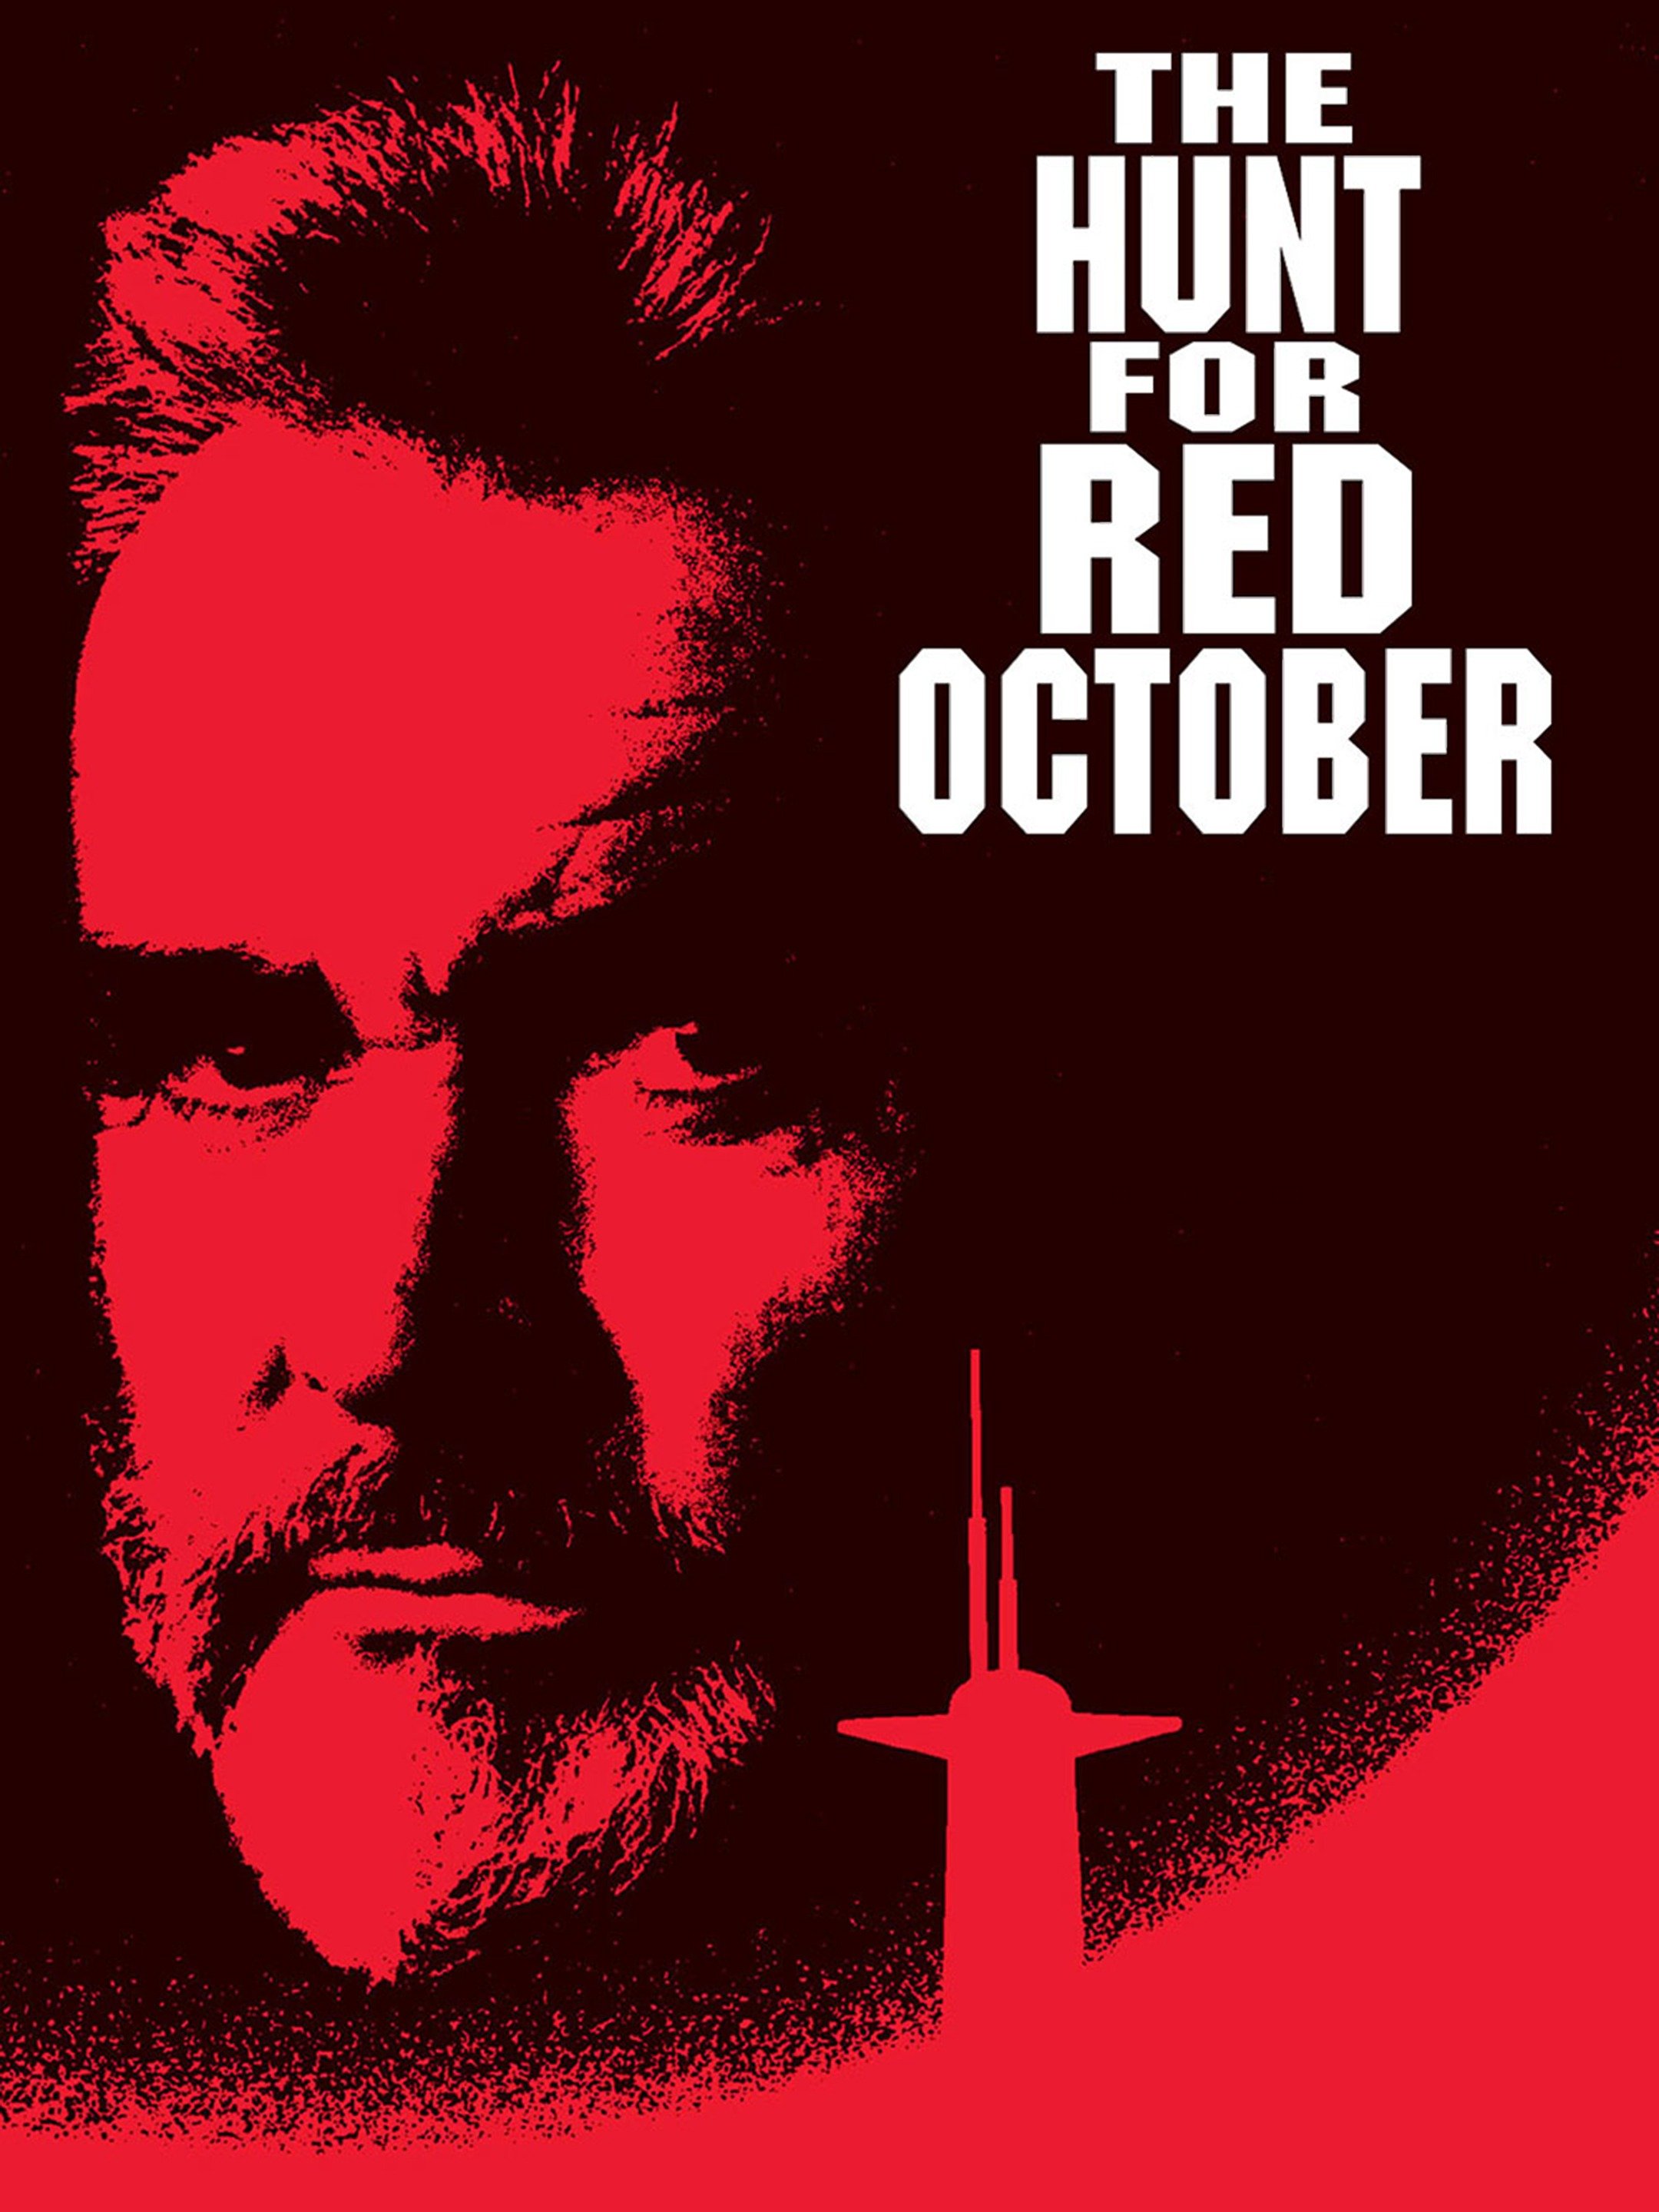 The Hunt for Red October: Official Clip - A Little Revolution - Trailers &  Videos - Rotten Tomatoes